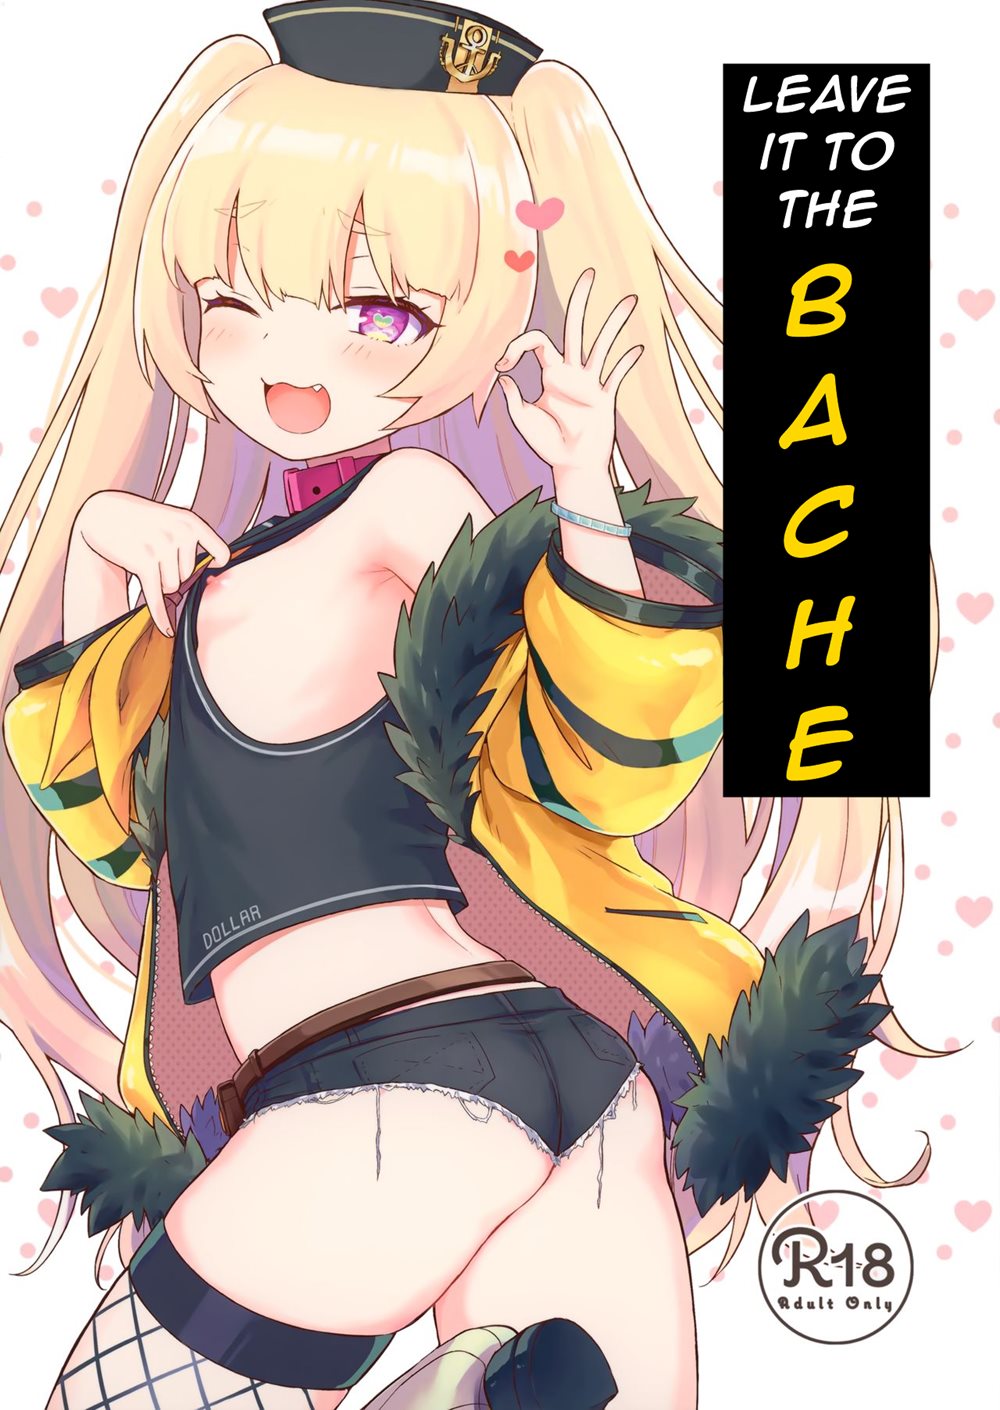 Leave It To The Bache! [Rewrite]